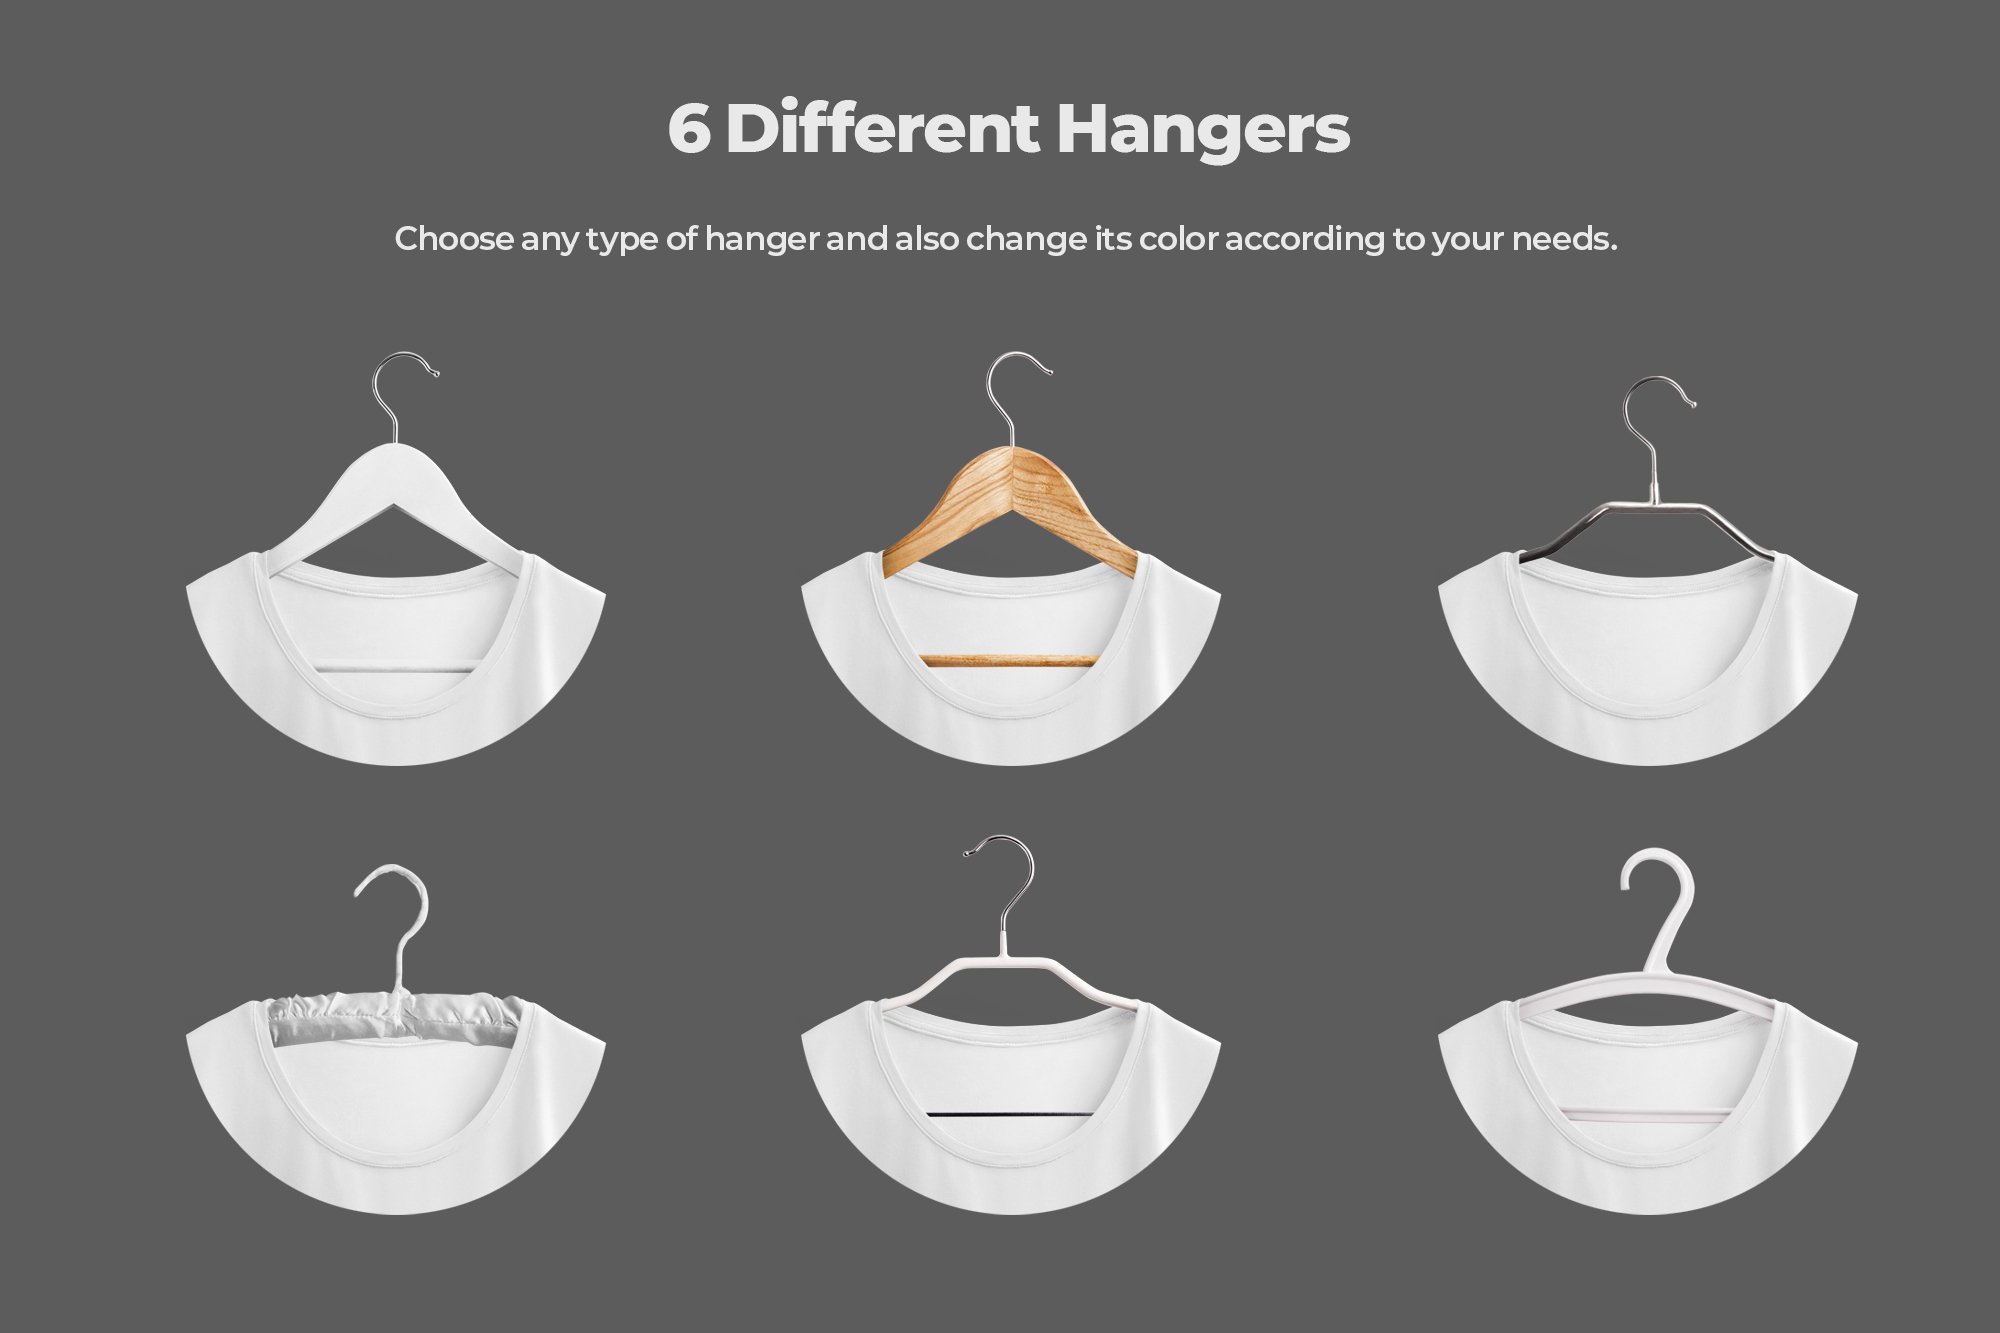 Set includes six different hangers.